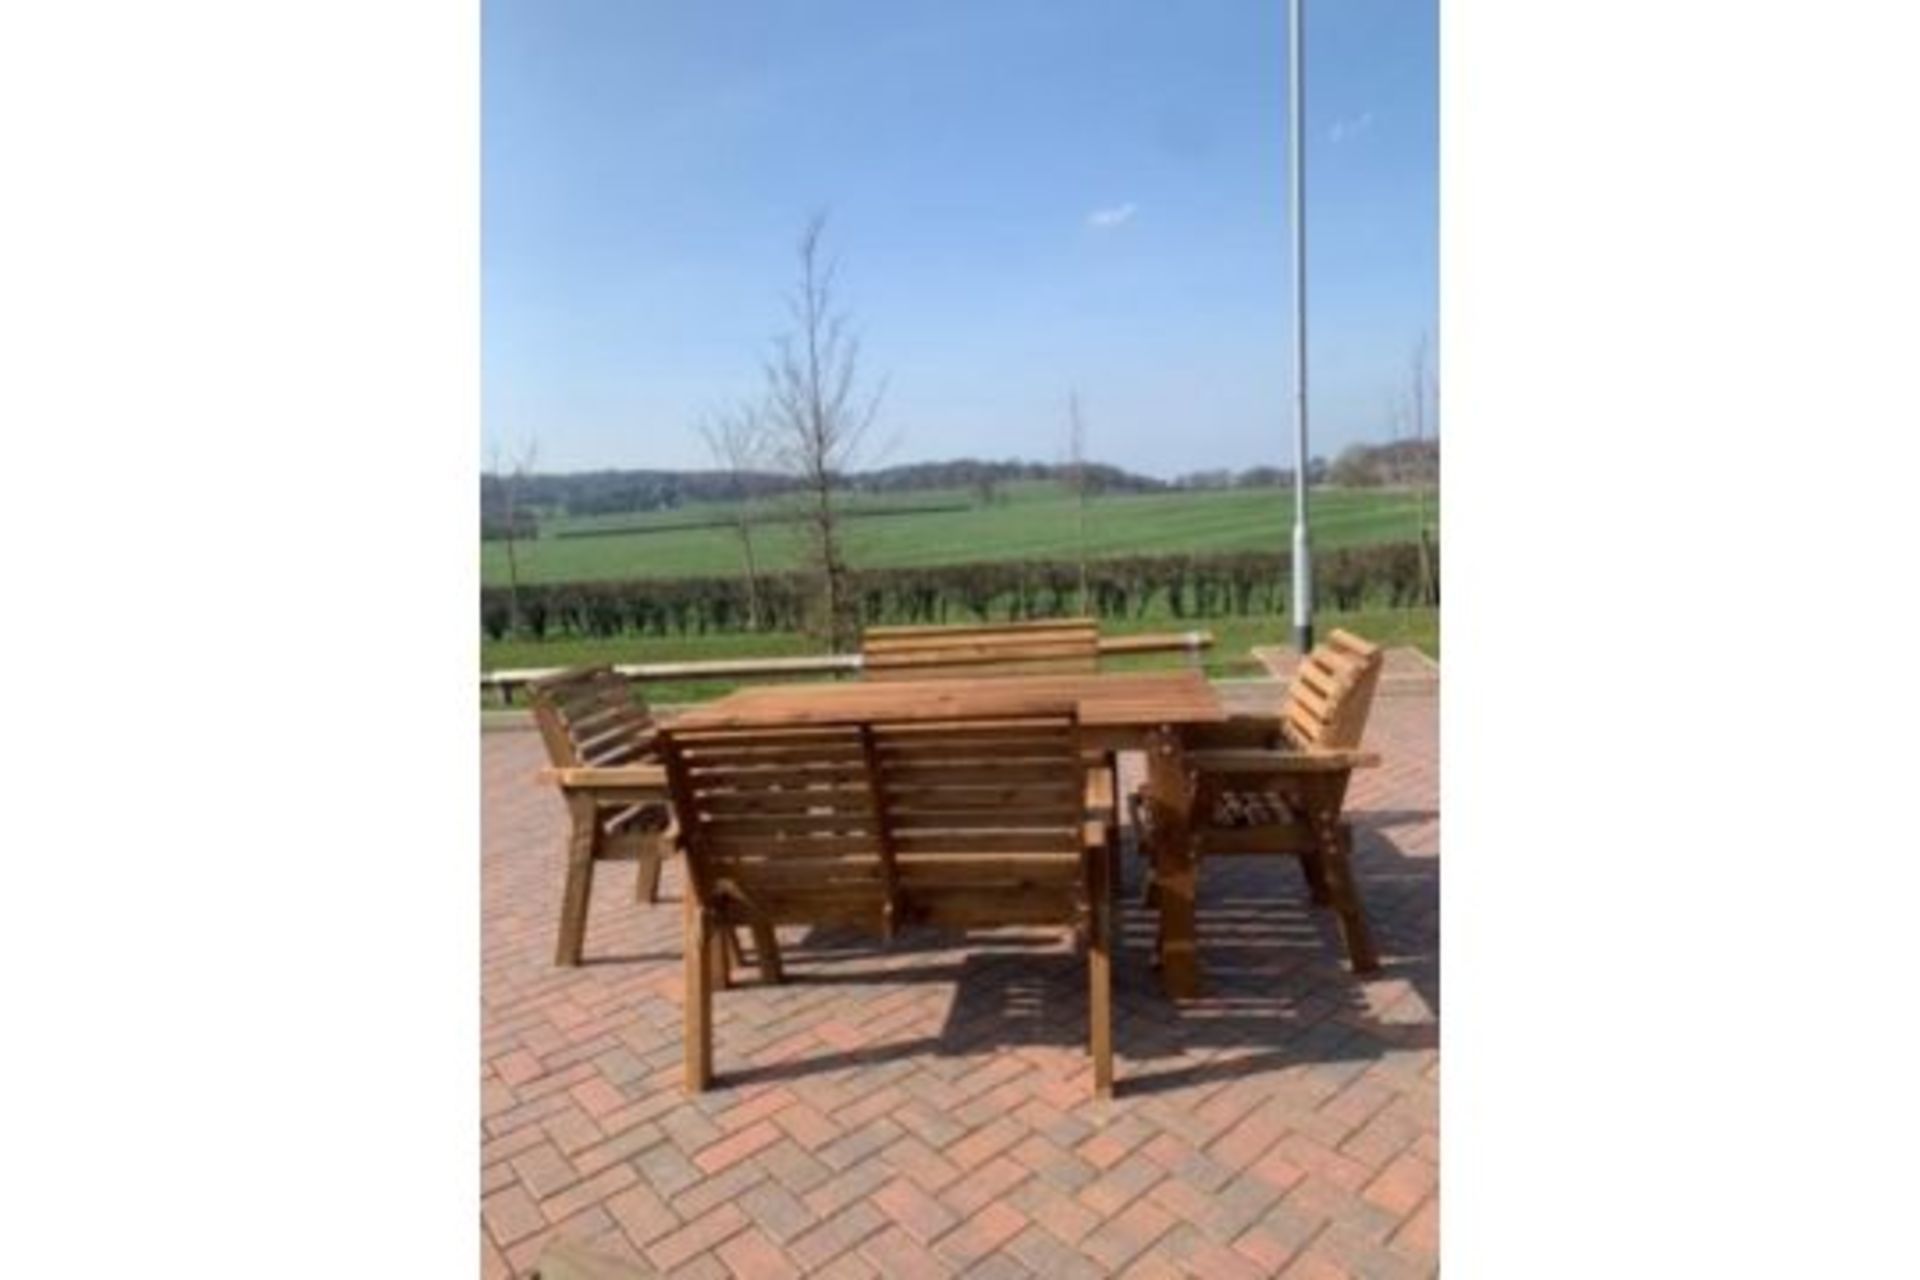 BRAND NEW QUALITY 6 seater handcrafted Garden Furniture set, Large table,2 benches, 2 chairs*NO VAT* - Image 3 of 8